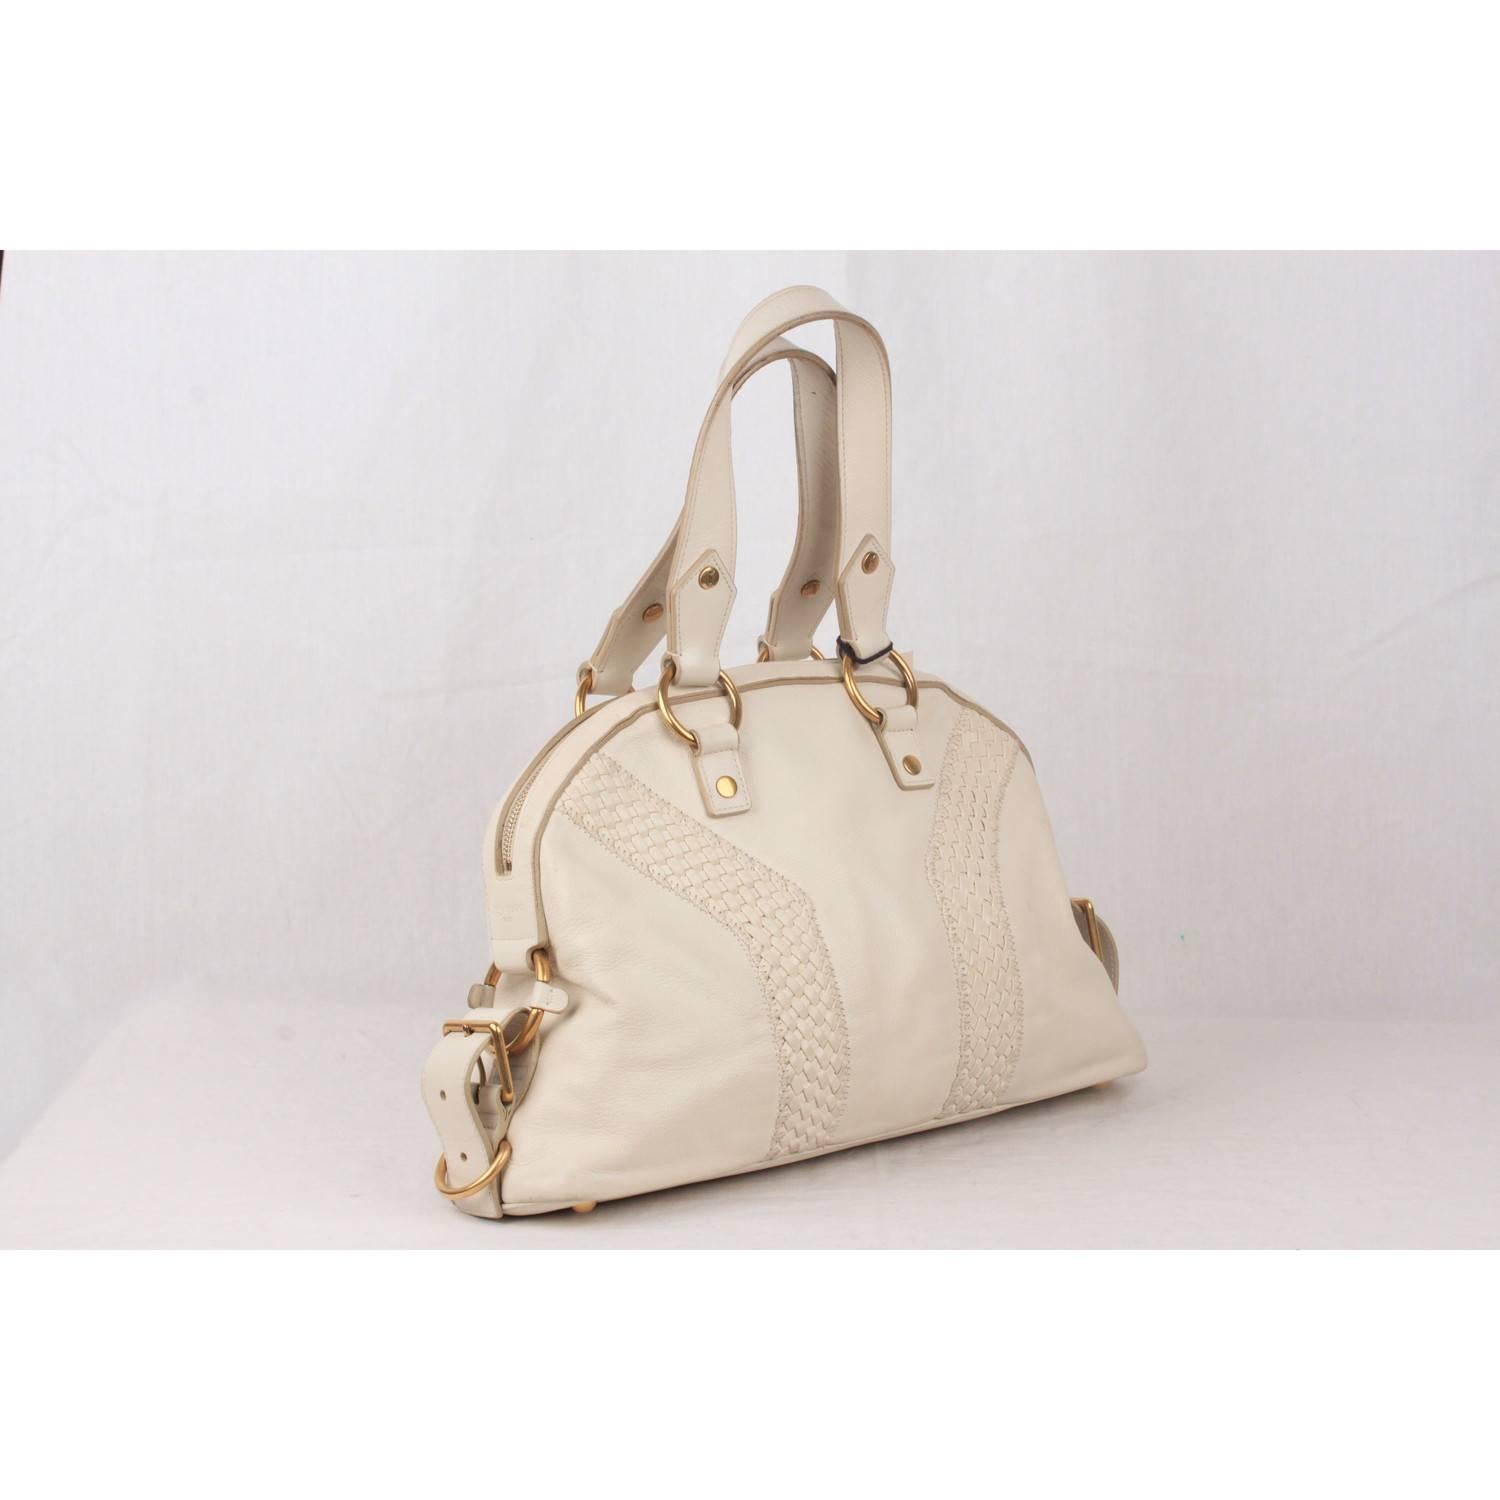 YVES SAINT LAURENT White Leather MUSE BAG Tote 3